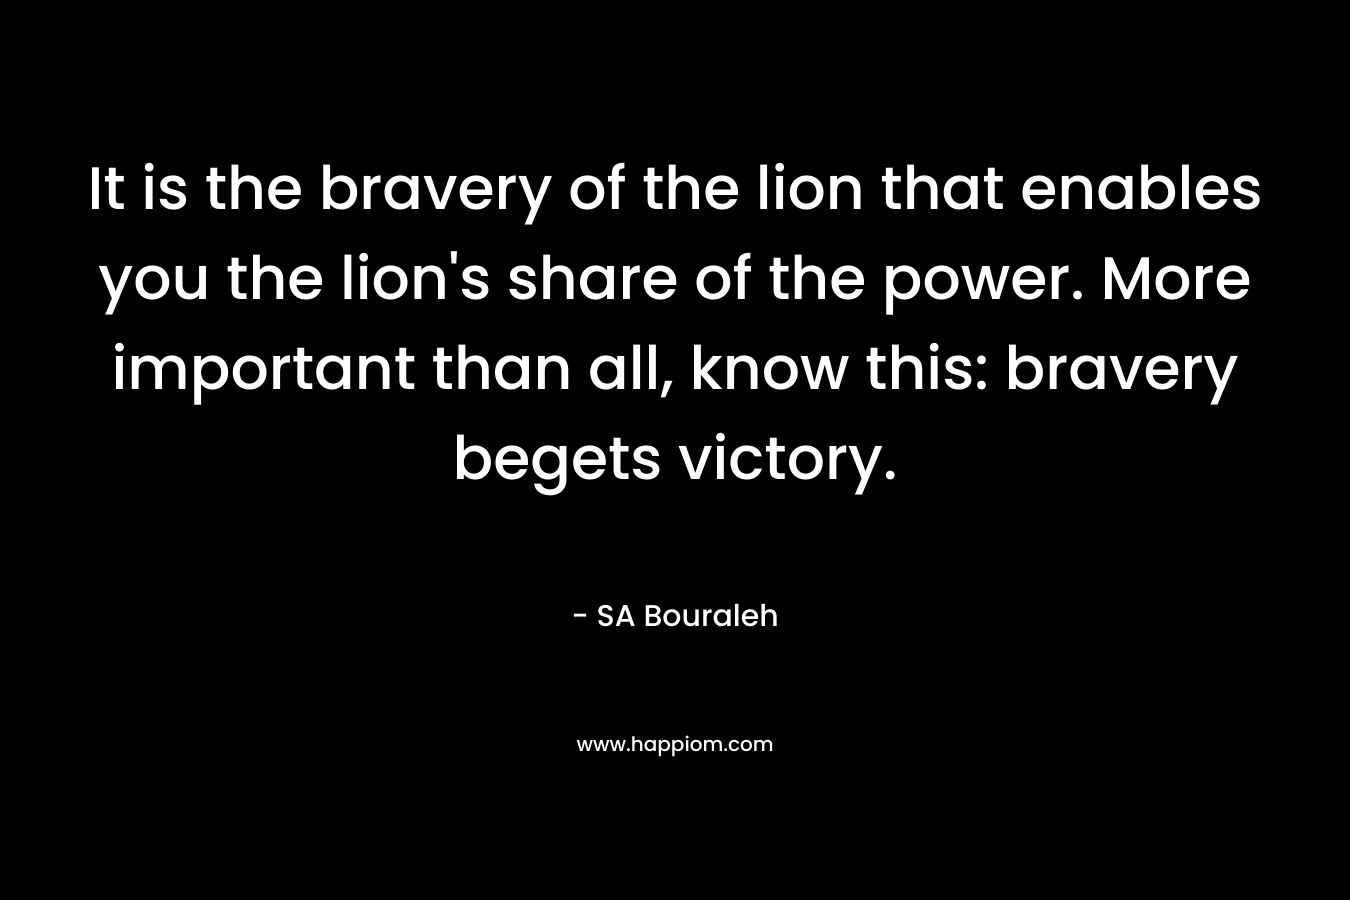 It is the bravery of the lion that enables you the lion’s share of the power. More important than all, know this: bravery begets victory. – SA Bouraleh